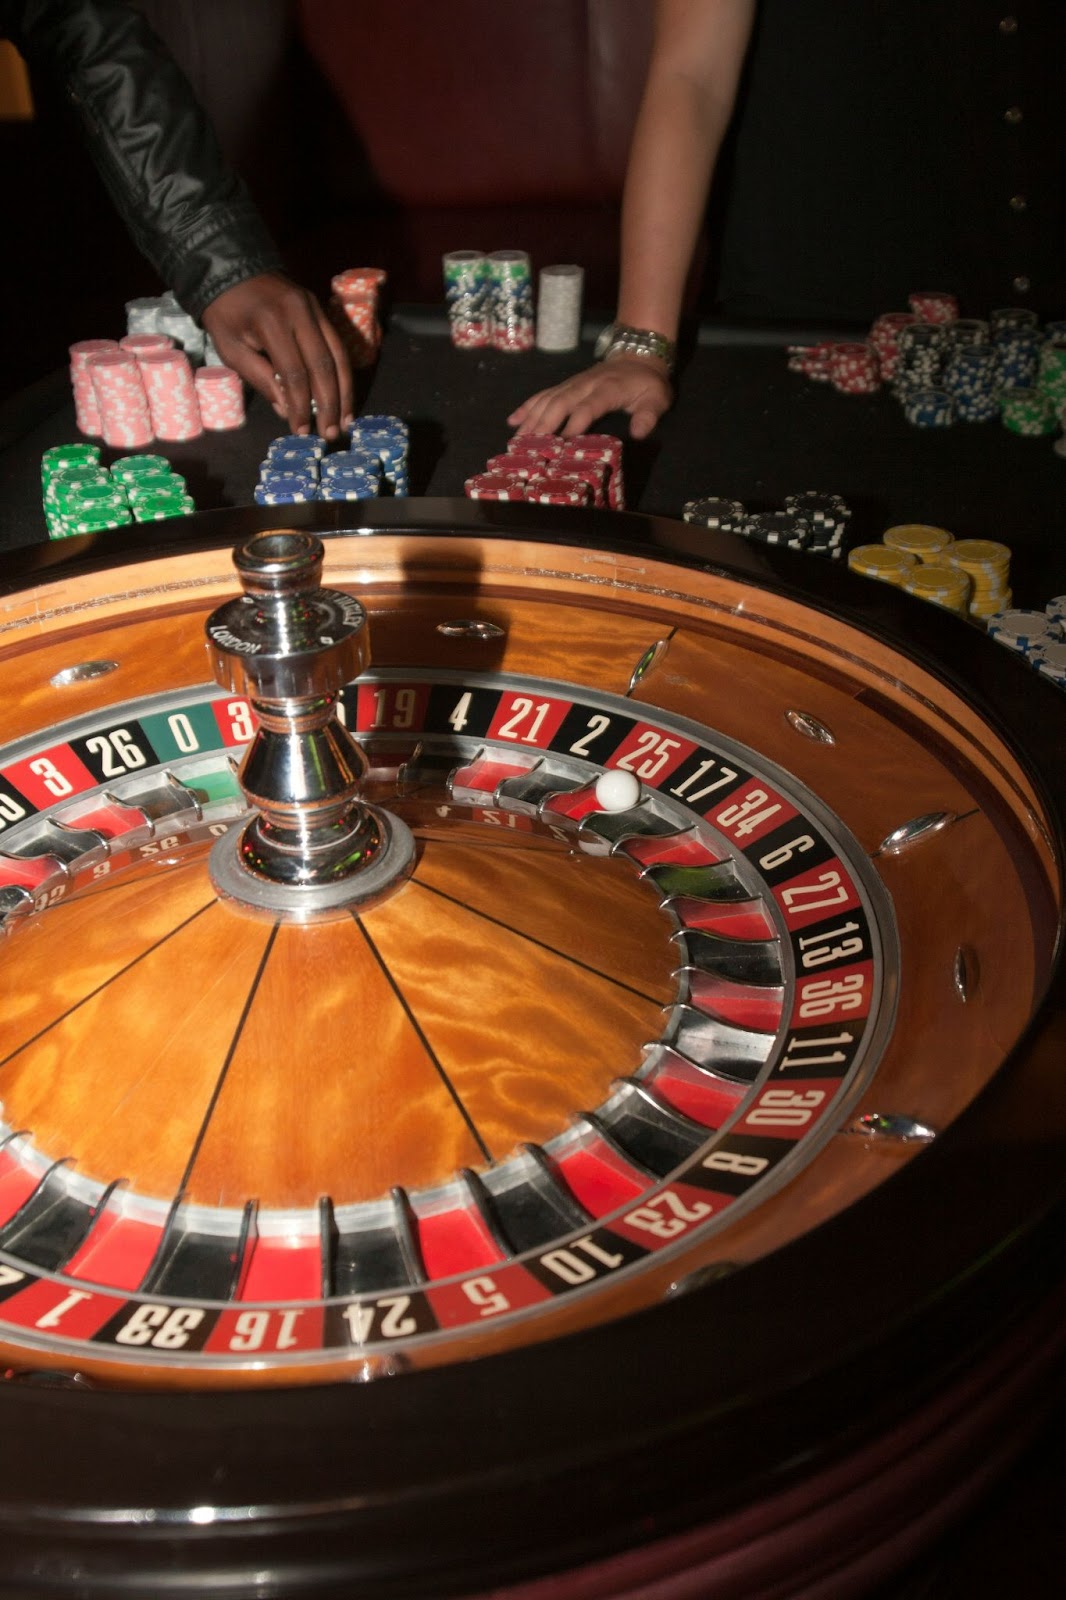 Packed with roulette: take them into account